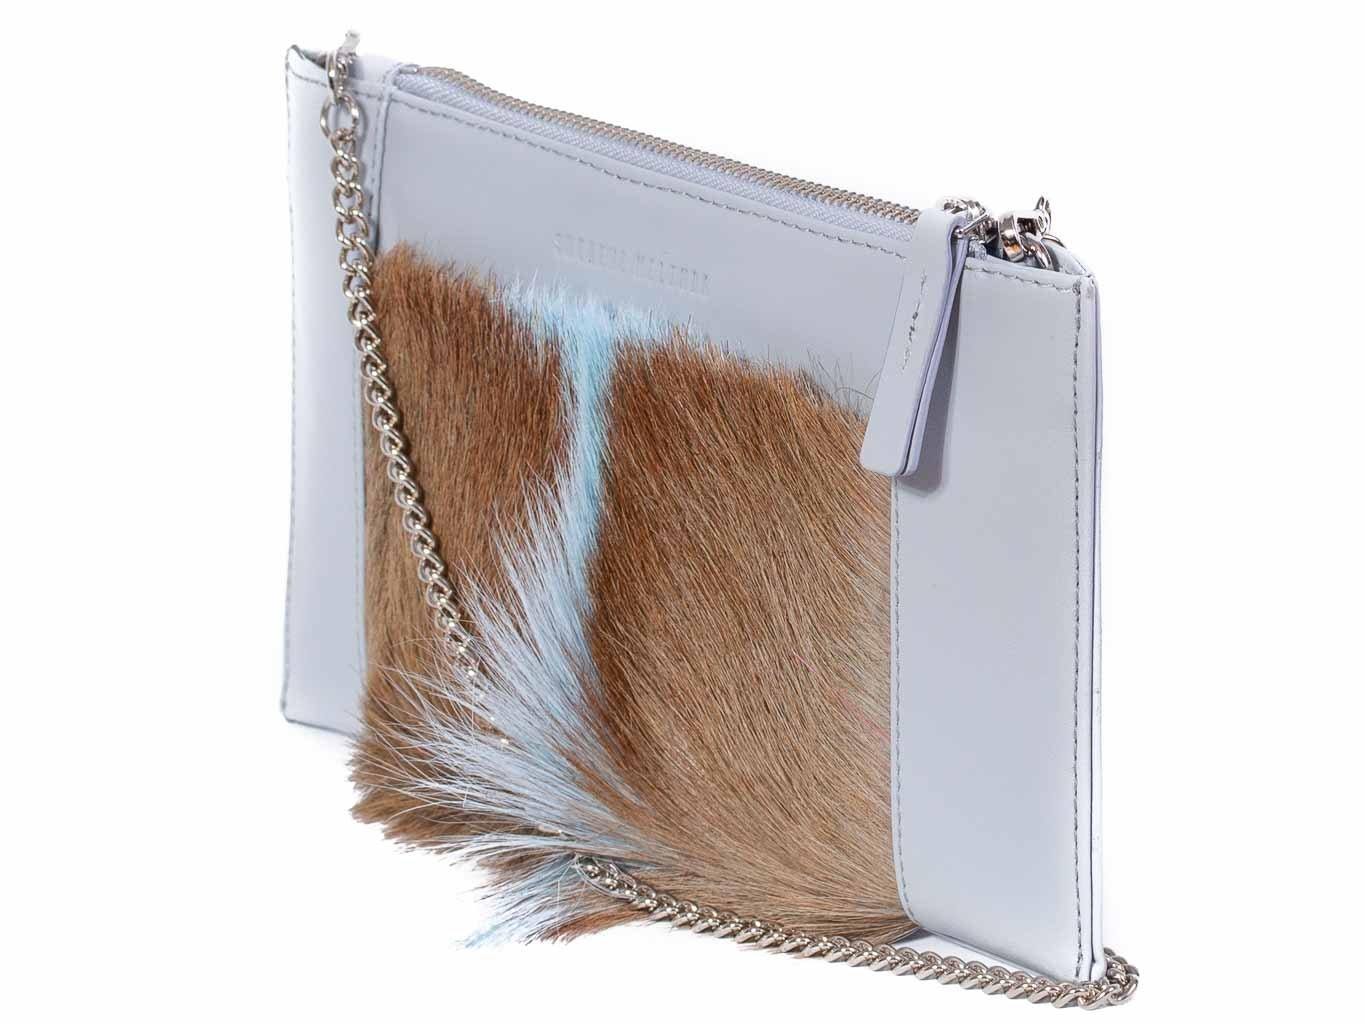 Clutch Springbok Handbag in Baby Blue with a fan feature by Sherene Melinda front angle strap